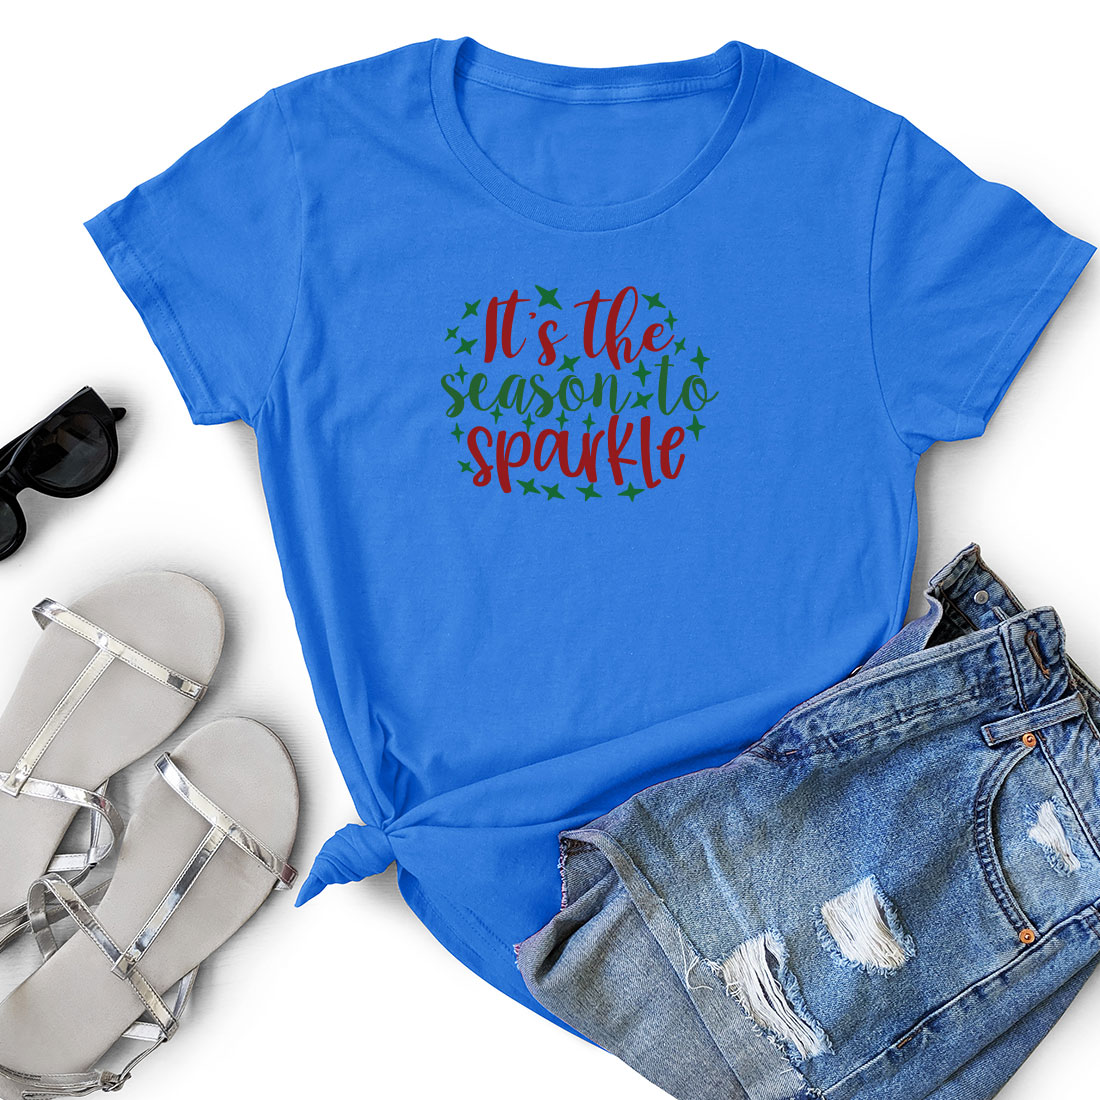 T - shirt that says it's the season to sparkle.